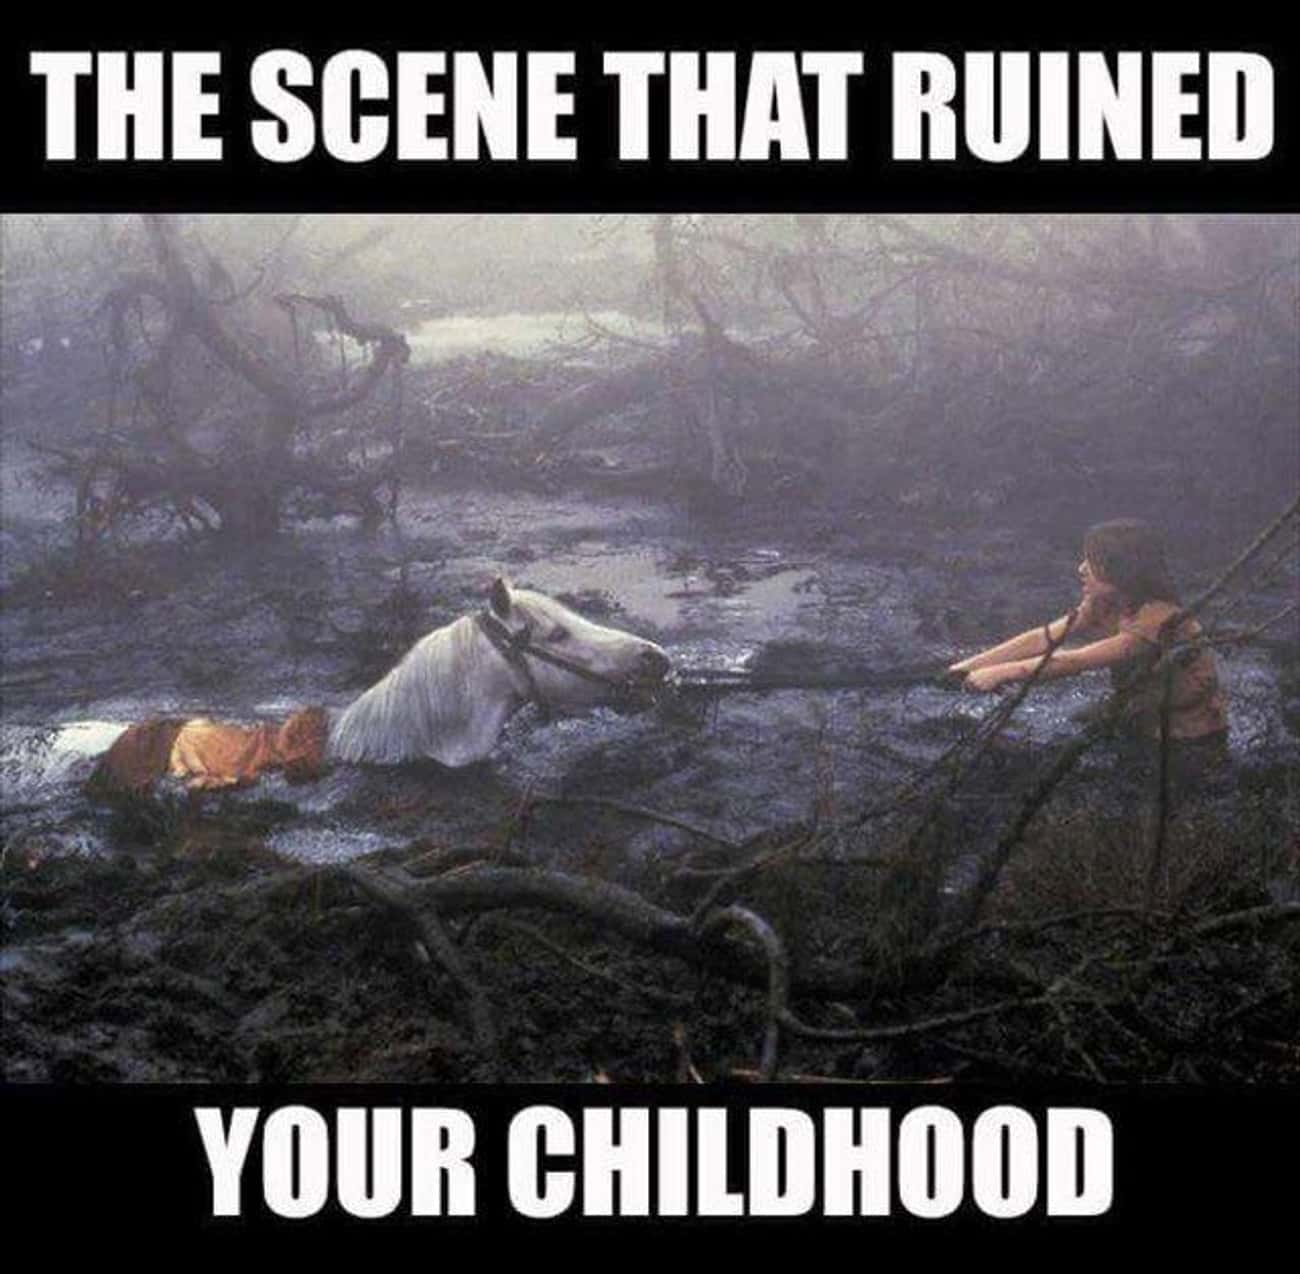 More Than Just The Swamp Scene In 'The NeverEnding Story'